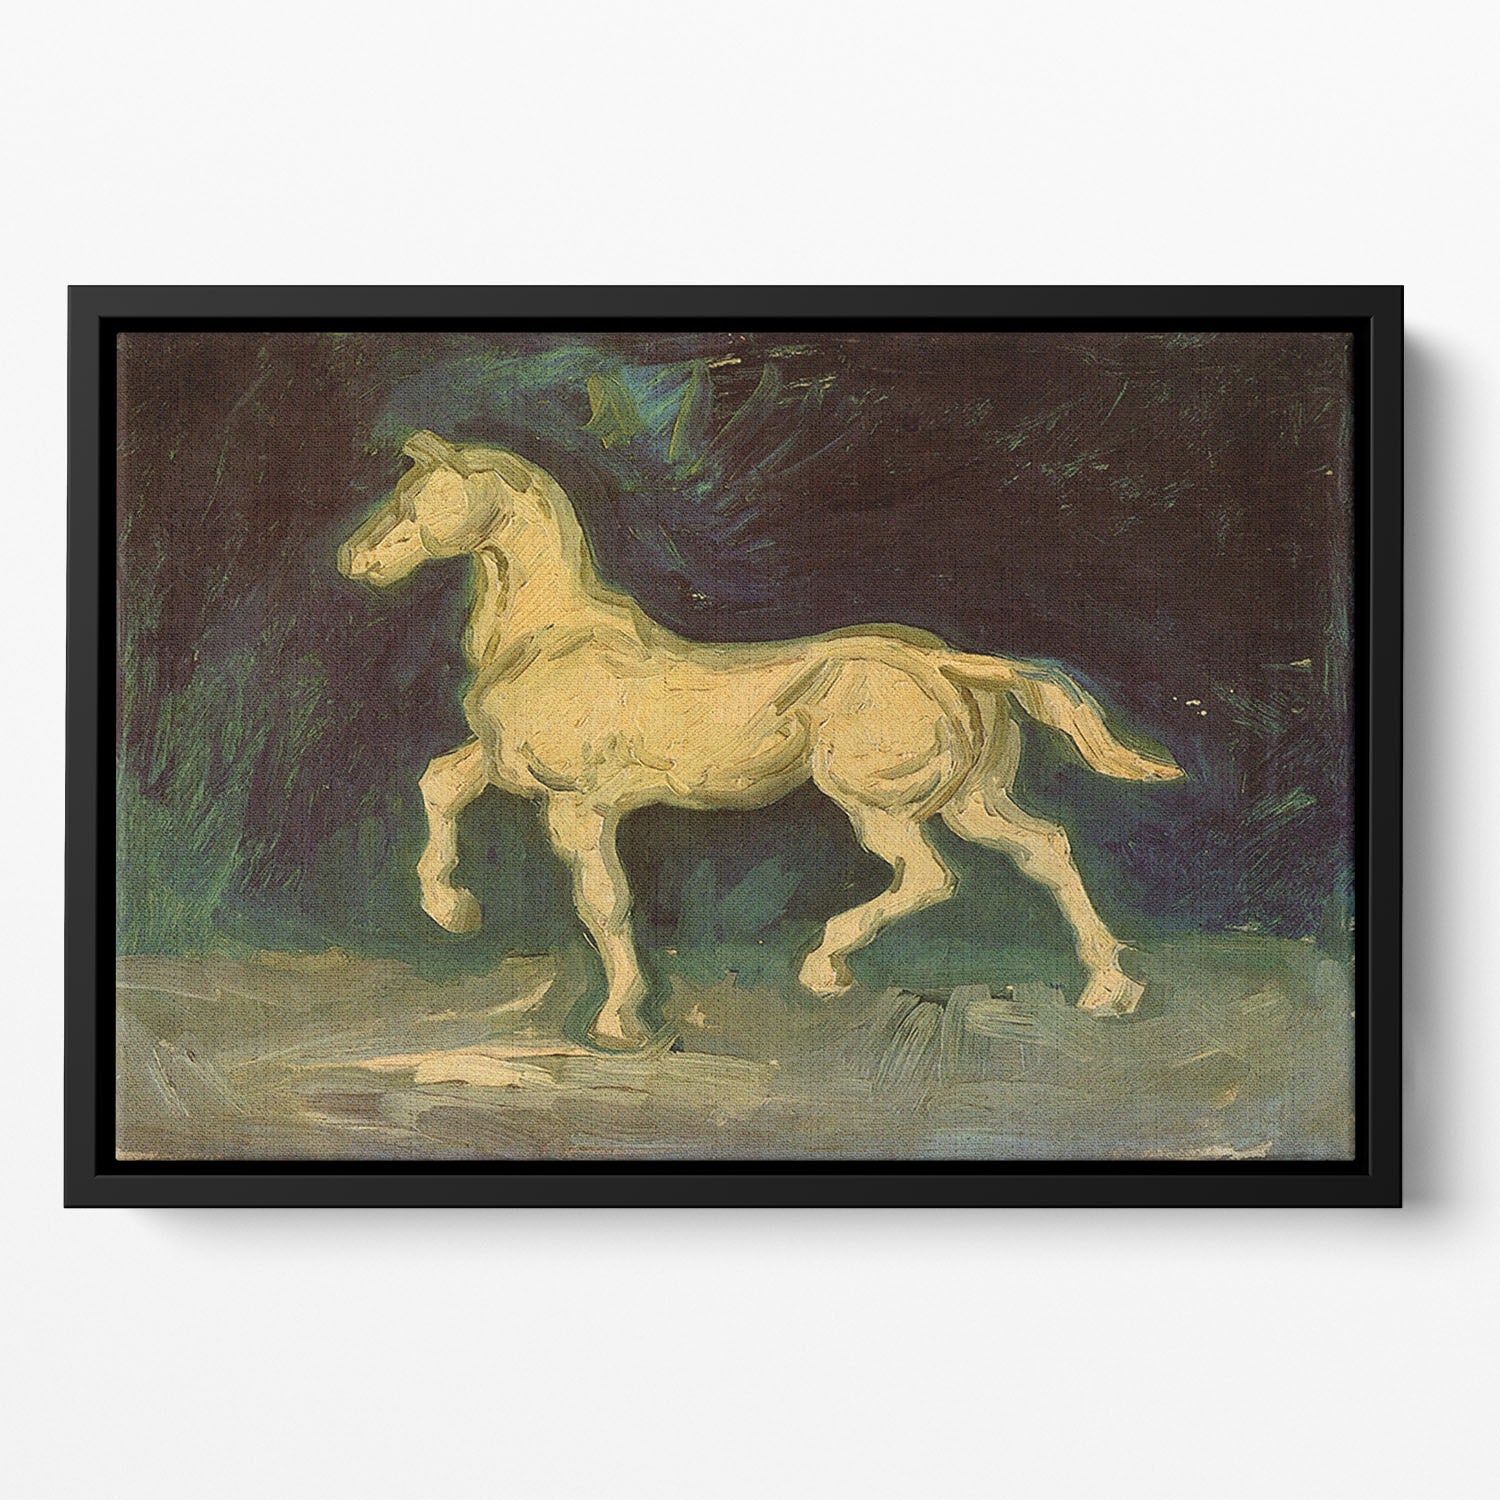 Plaster Statuette of a Horse by Van Gogh Floating Framed Canvas